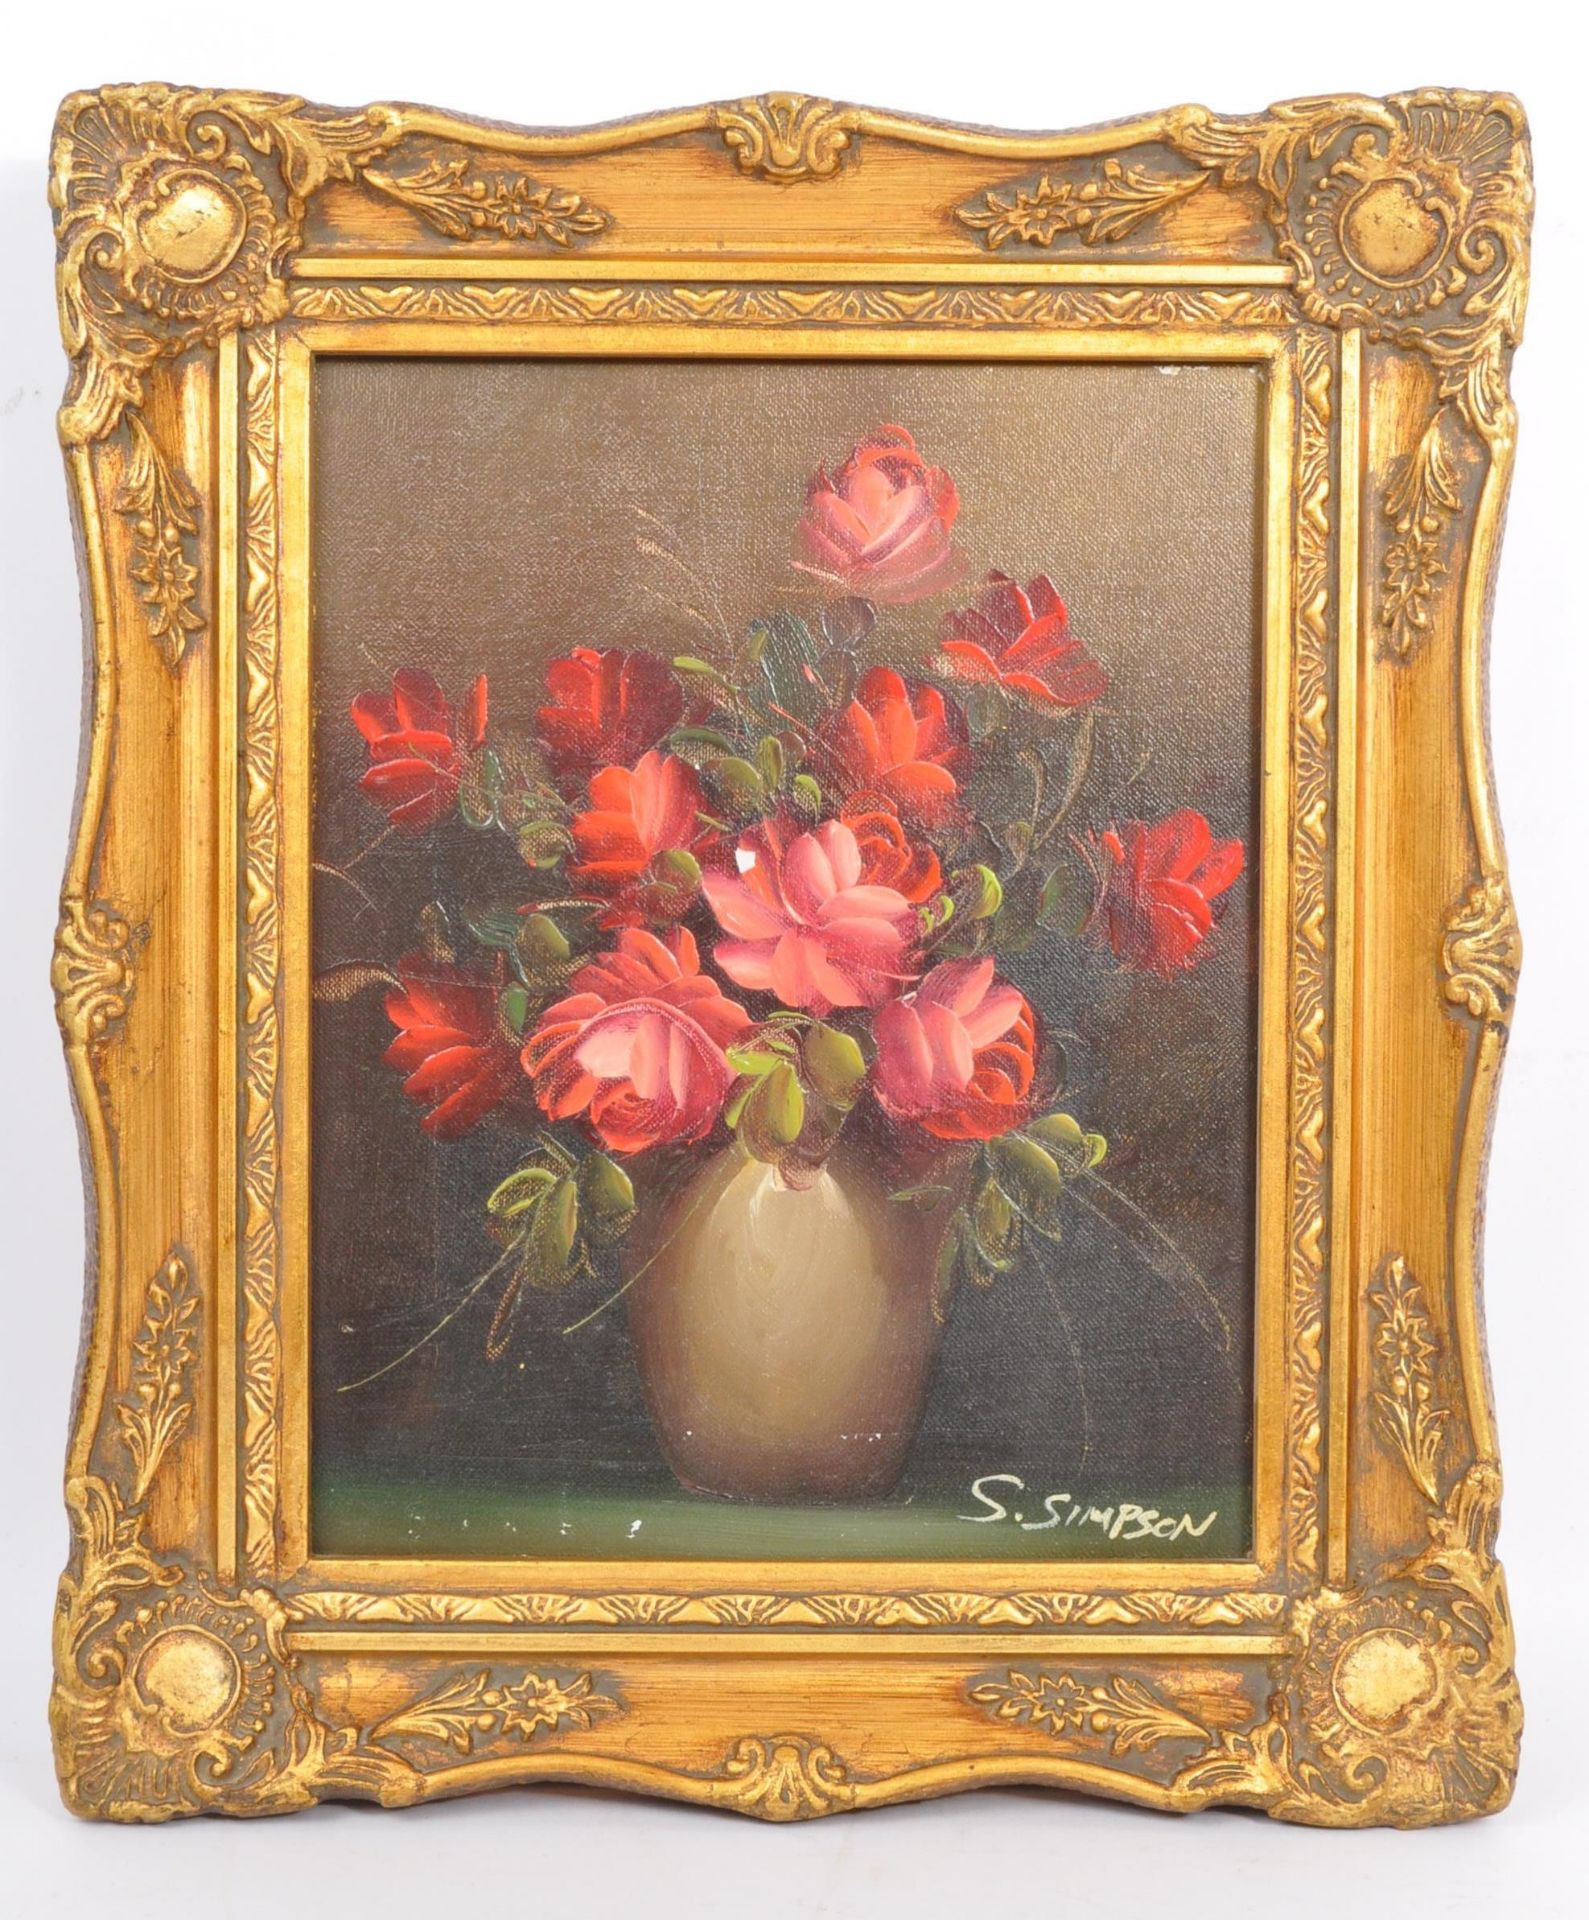 PAIR OF VINTAGE OIL ON CANVAS FLORAL PAINTINGS BY S.SIMPSON - Image 2 of 6